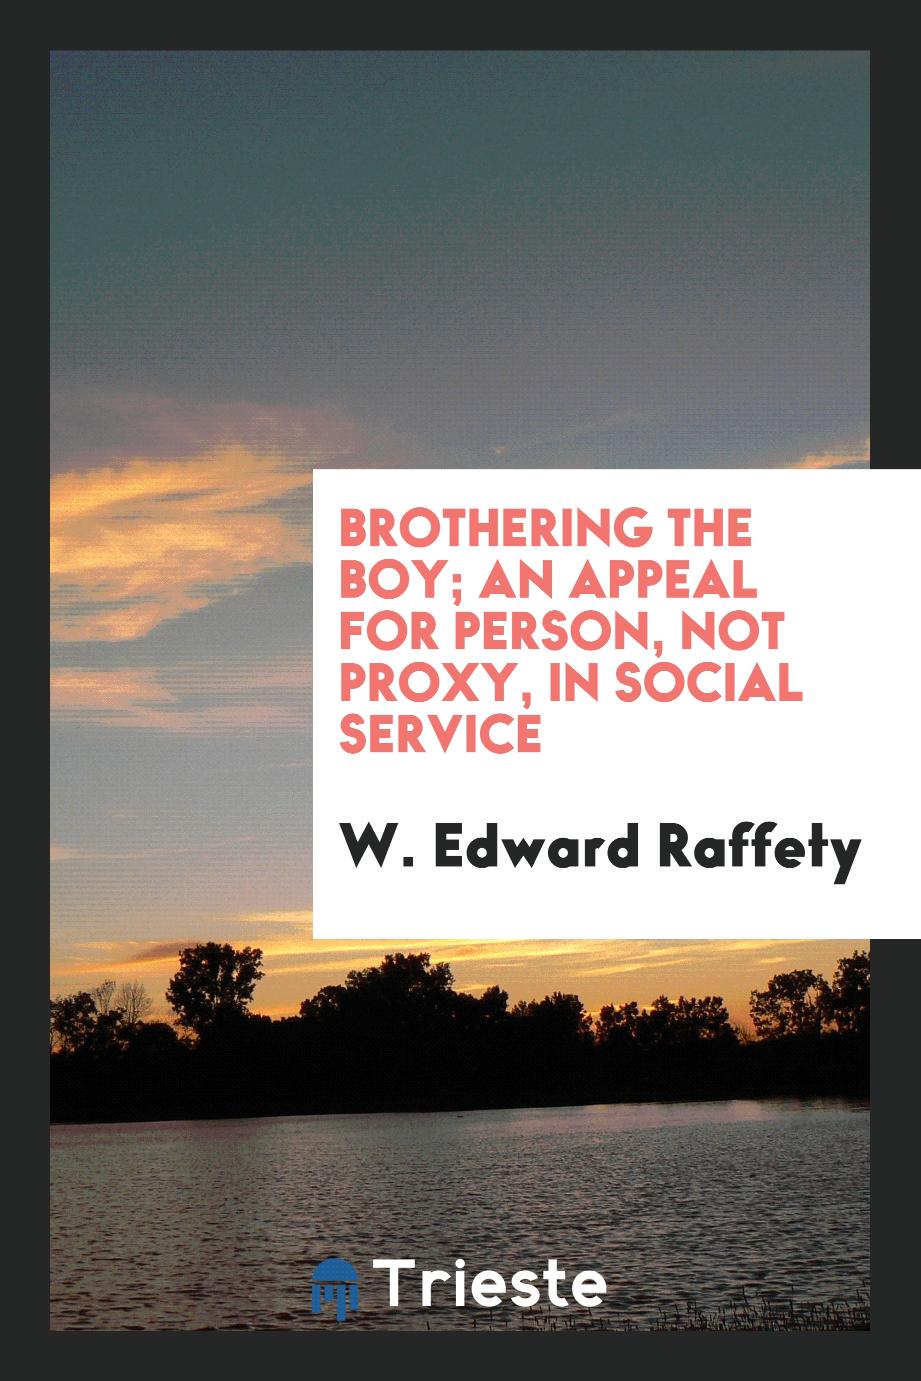 Brothering the boy; an appeal for person, not proxy, in social service